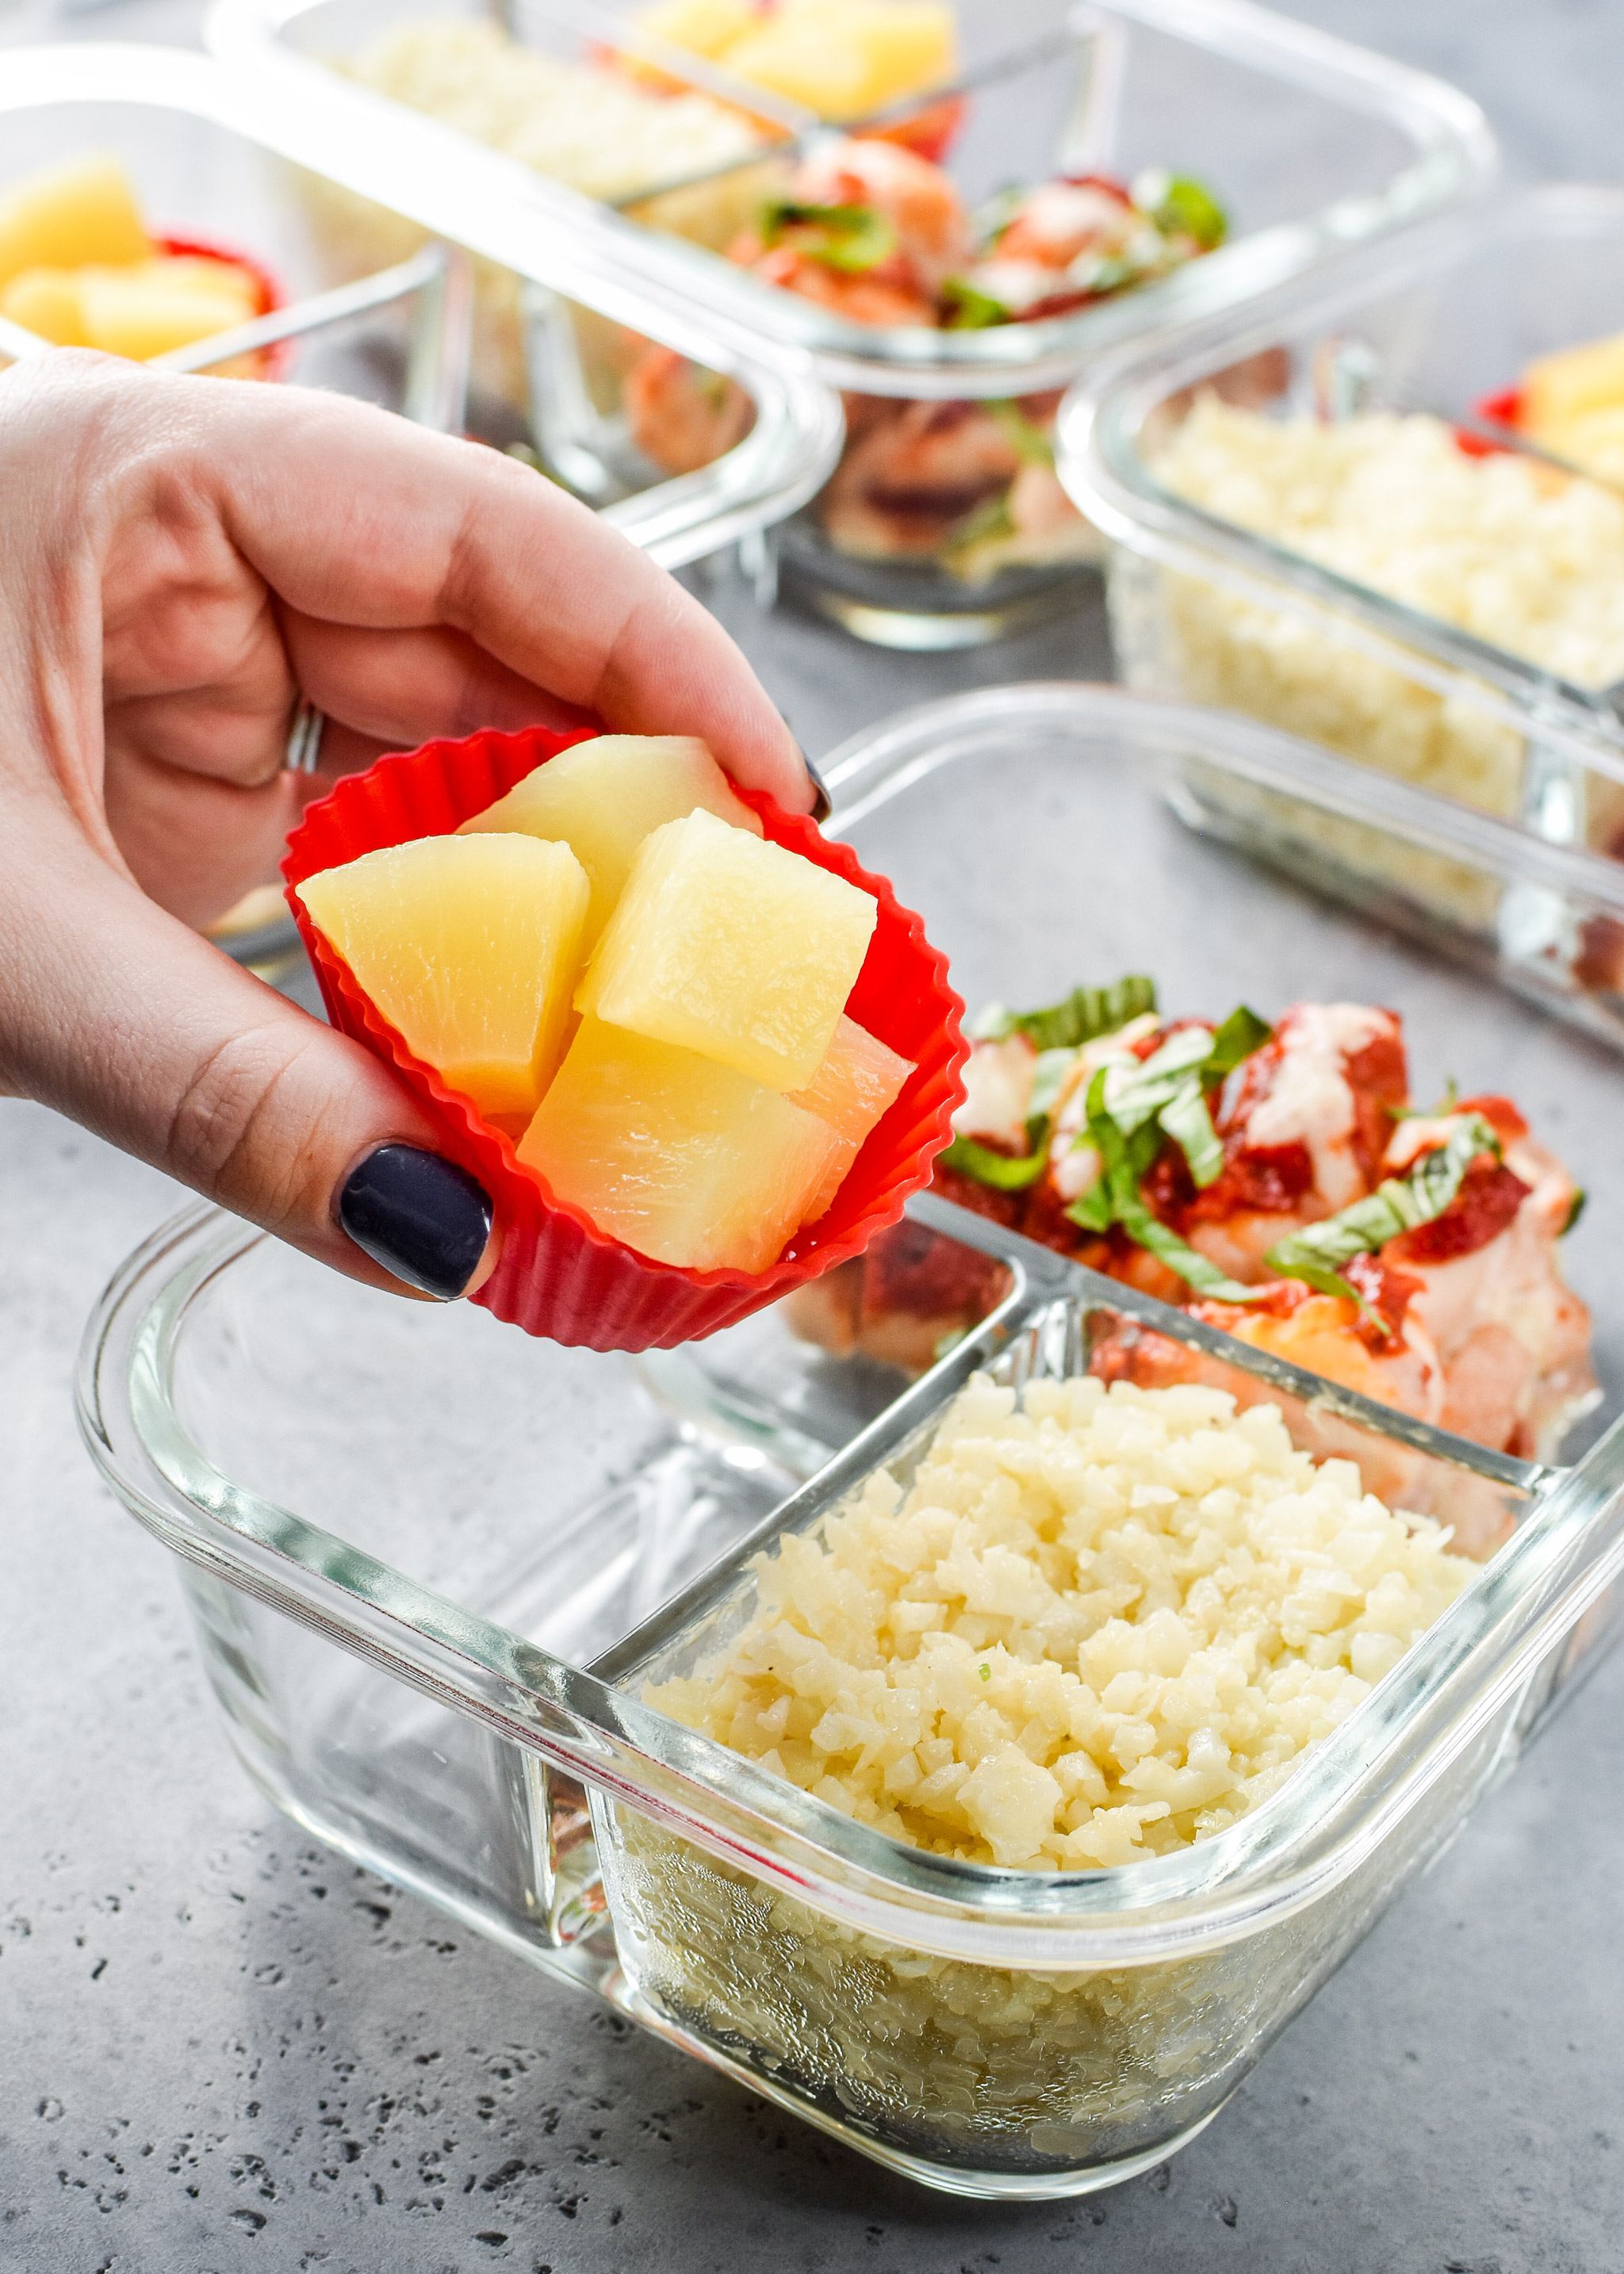 Take pineapple in and out of the glass container easily to microwave the rest of the Pizza Chicken Roll Up Meal Prep